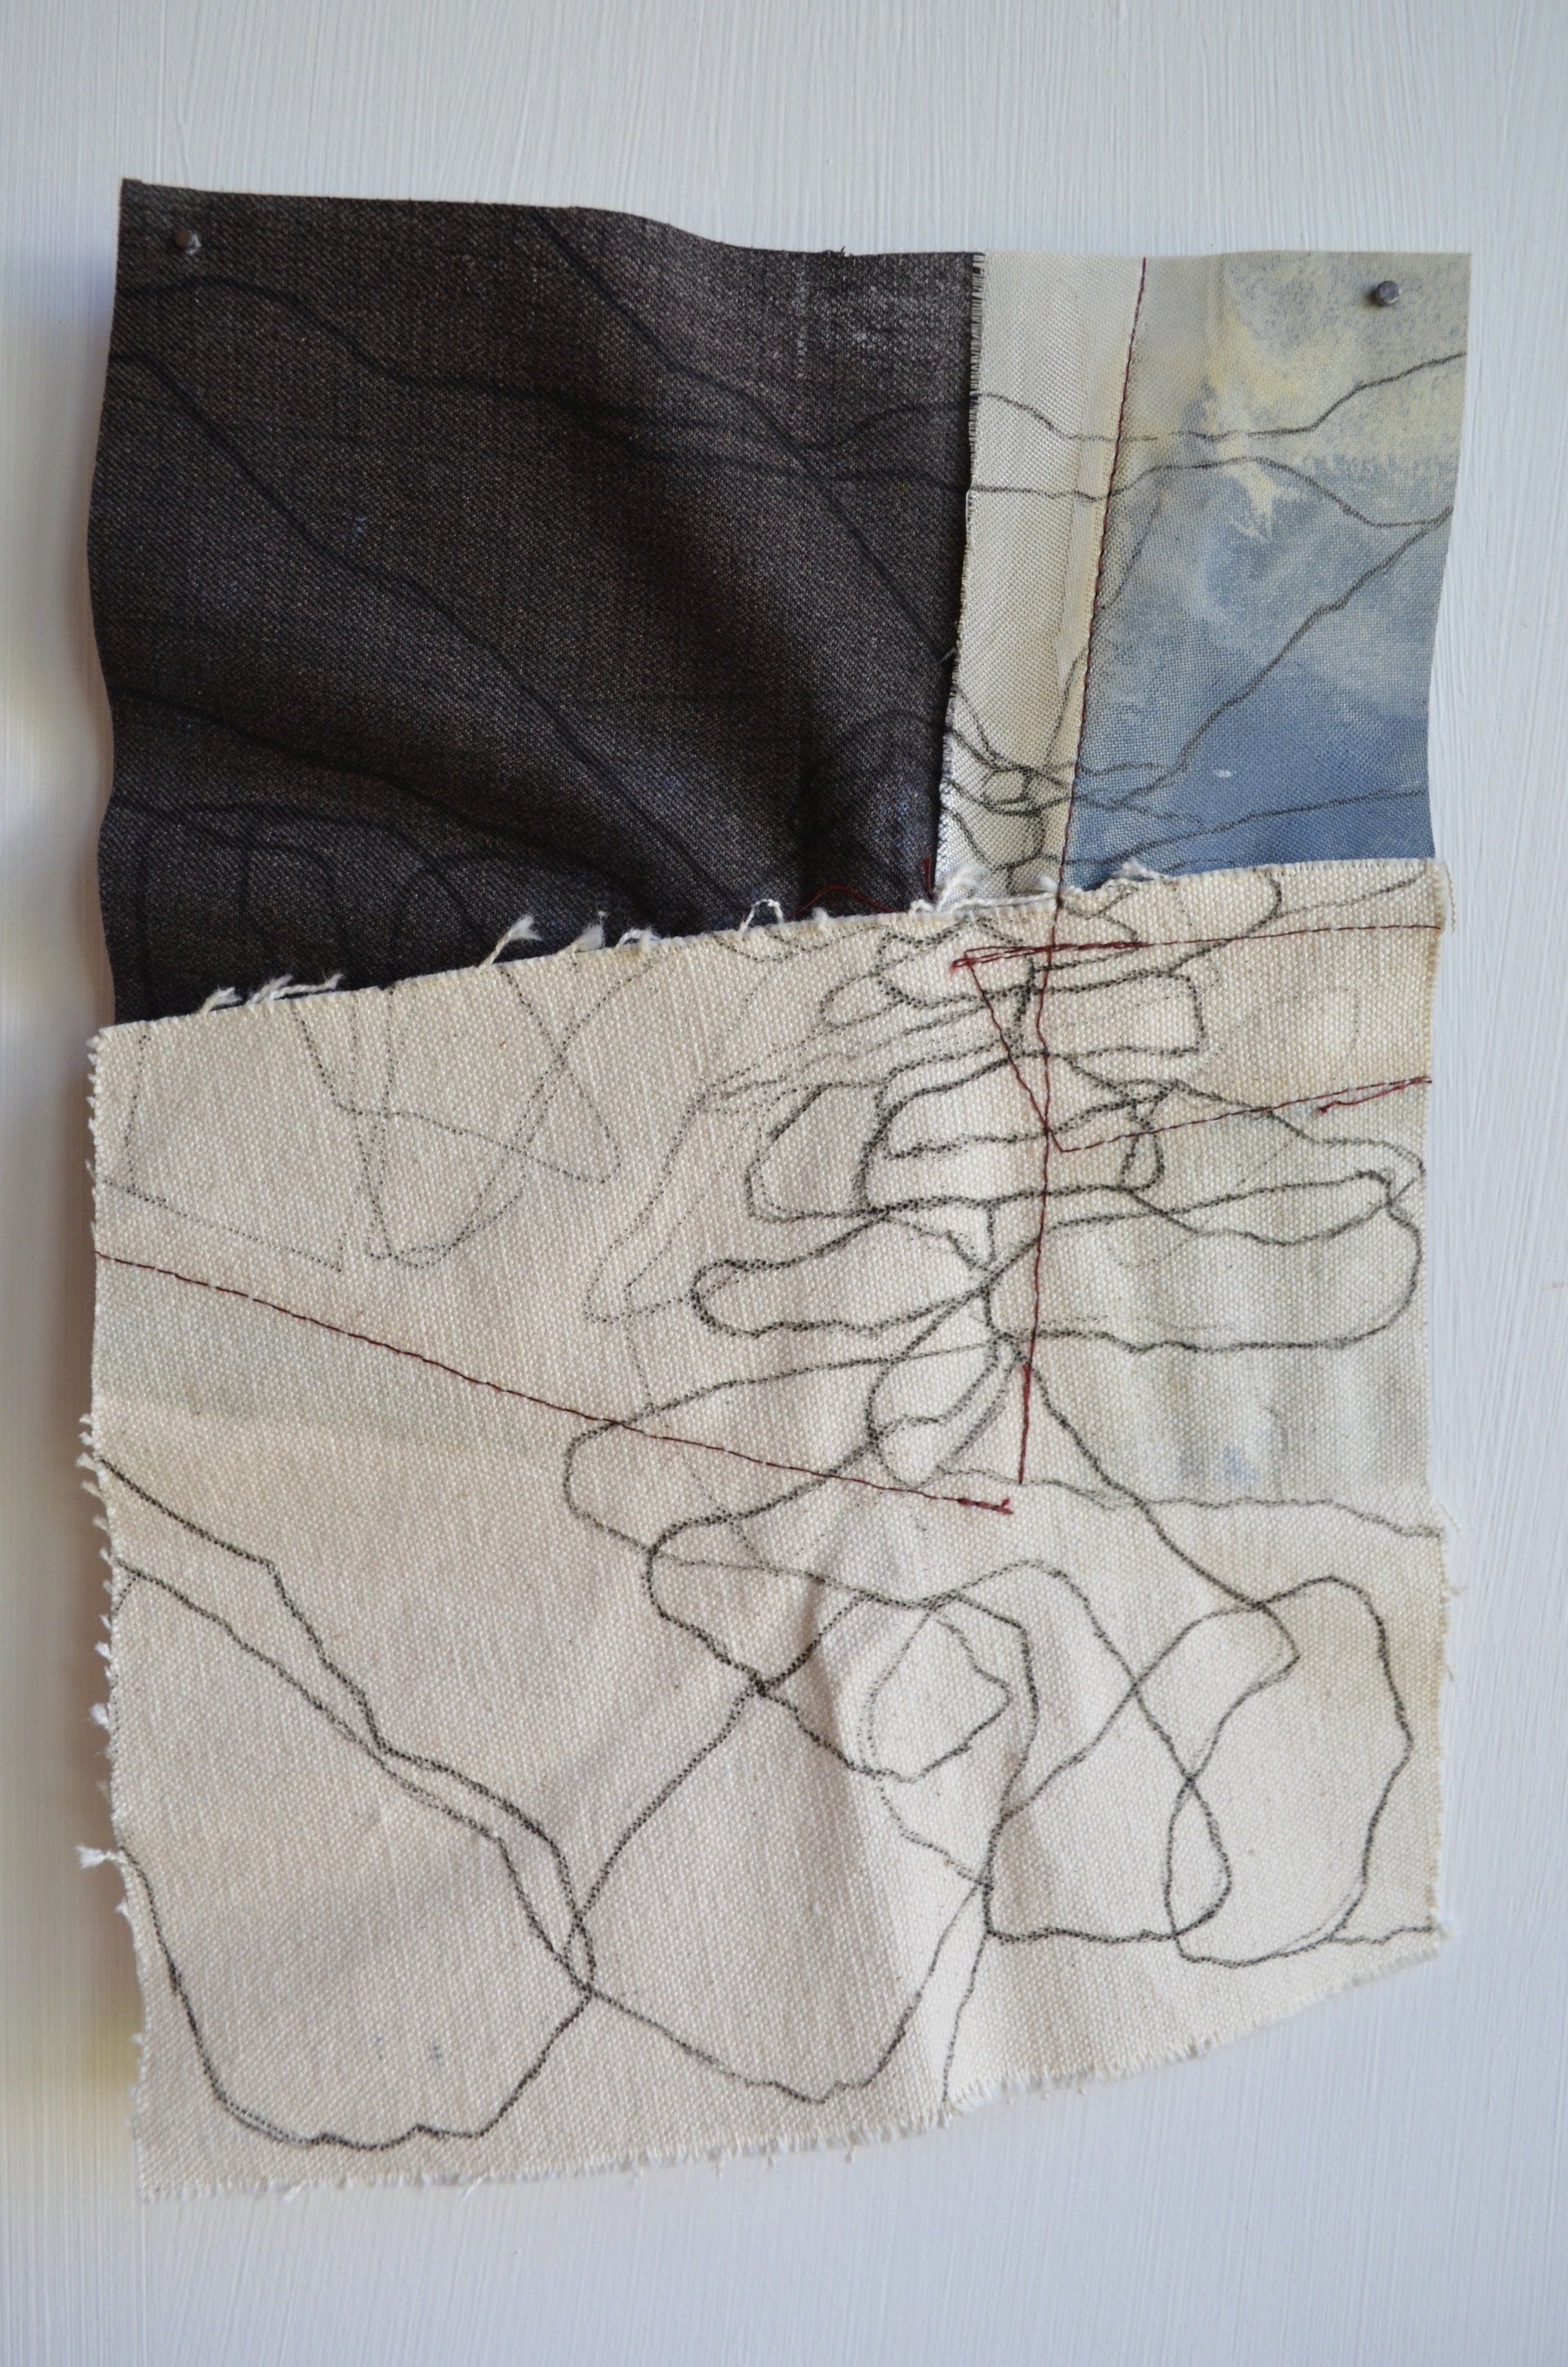 artwork with black line drawing on sewn materials by siobhan mclaughlin